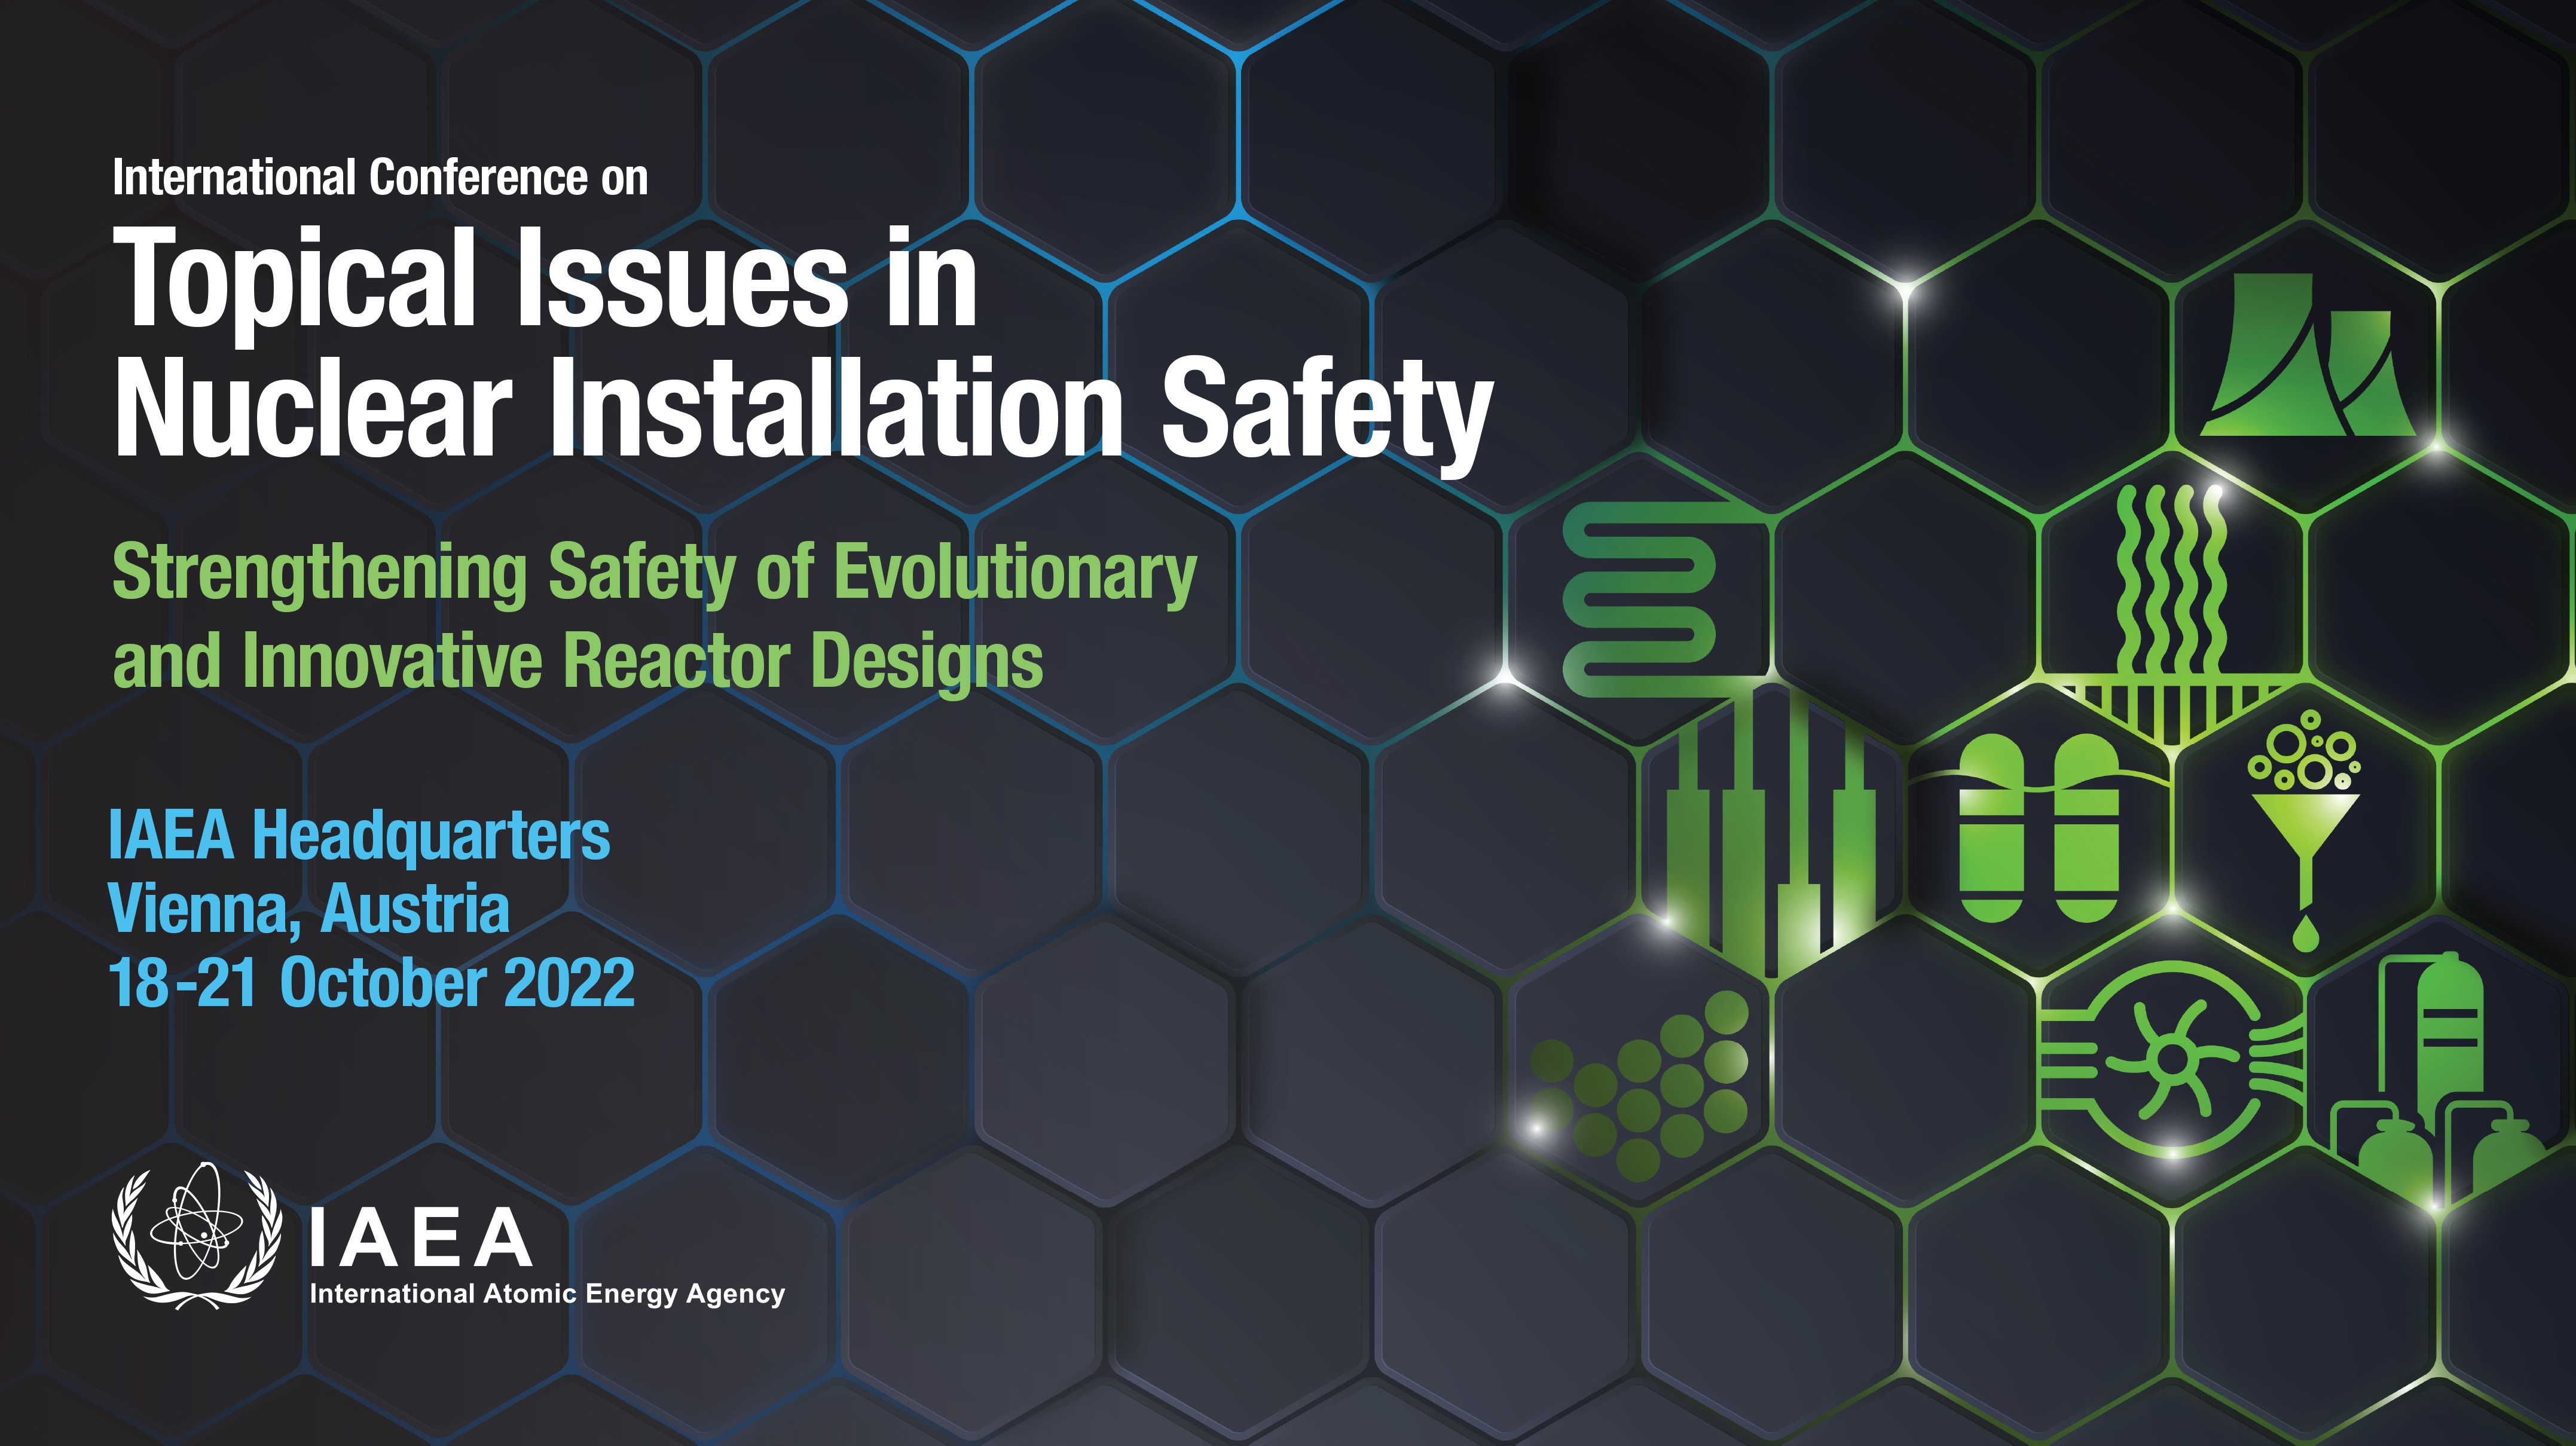 Visual with text: "International Conference on Topical Issues in Nuclear Installation Safety: Strengthening Safety of Evolutionary and Innovative Reactor Designs - 18 to 21 October 2022 - IAEA Headquarters, Vienna, Austria"